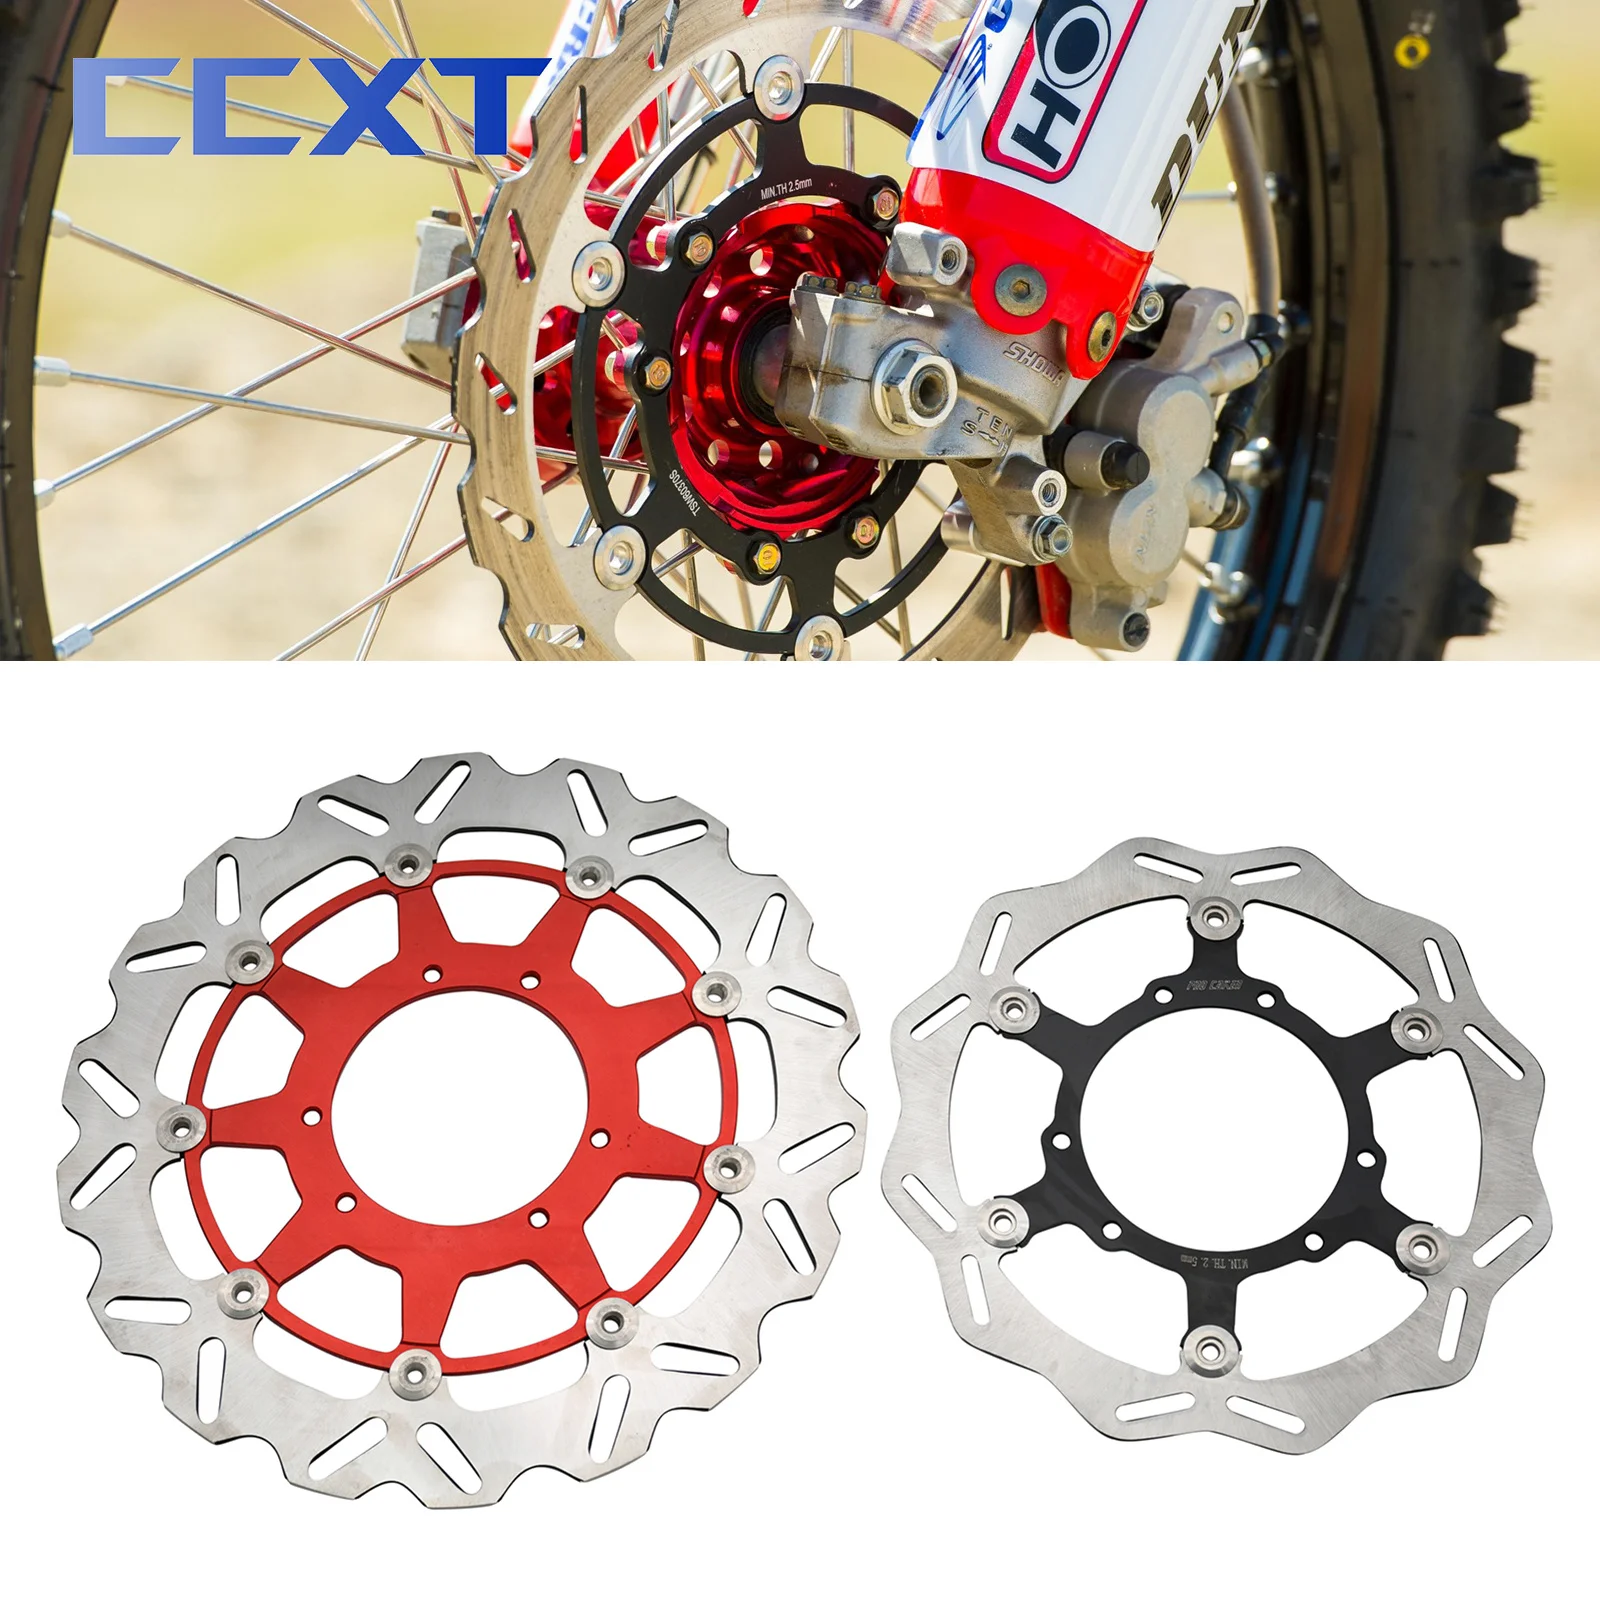 

260mm 320mm Motorcycle Front Floating Brake Disc Rotor Disk For Honda CR125 CR250 CRF250R CRF450R CRF250X CRF450X CRF250RX 450RX